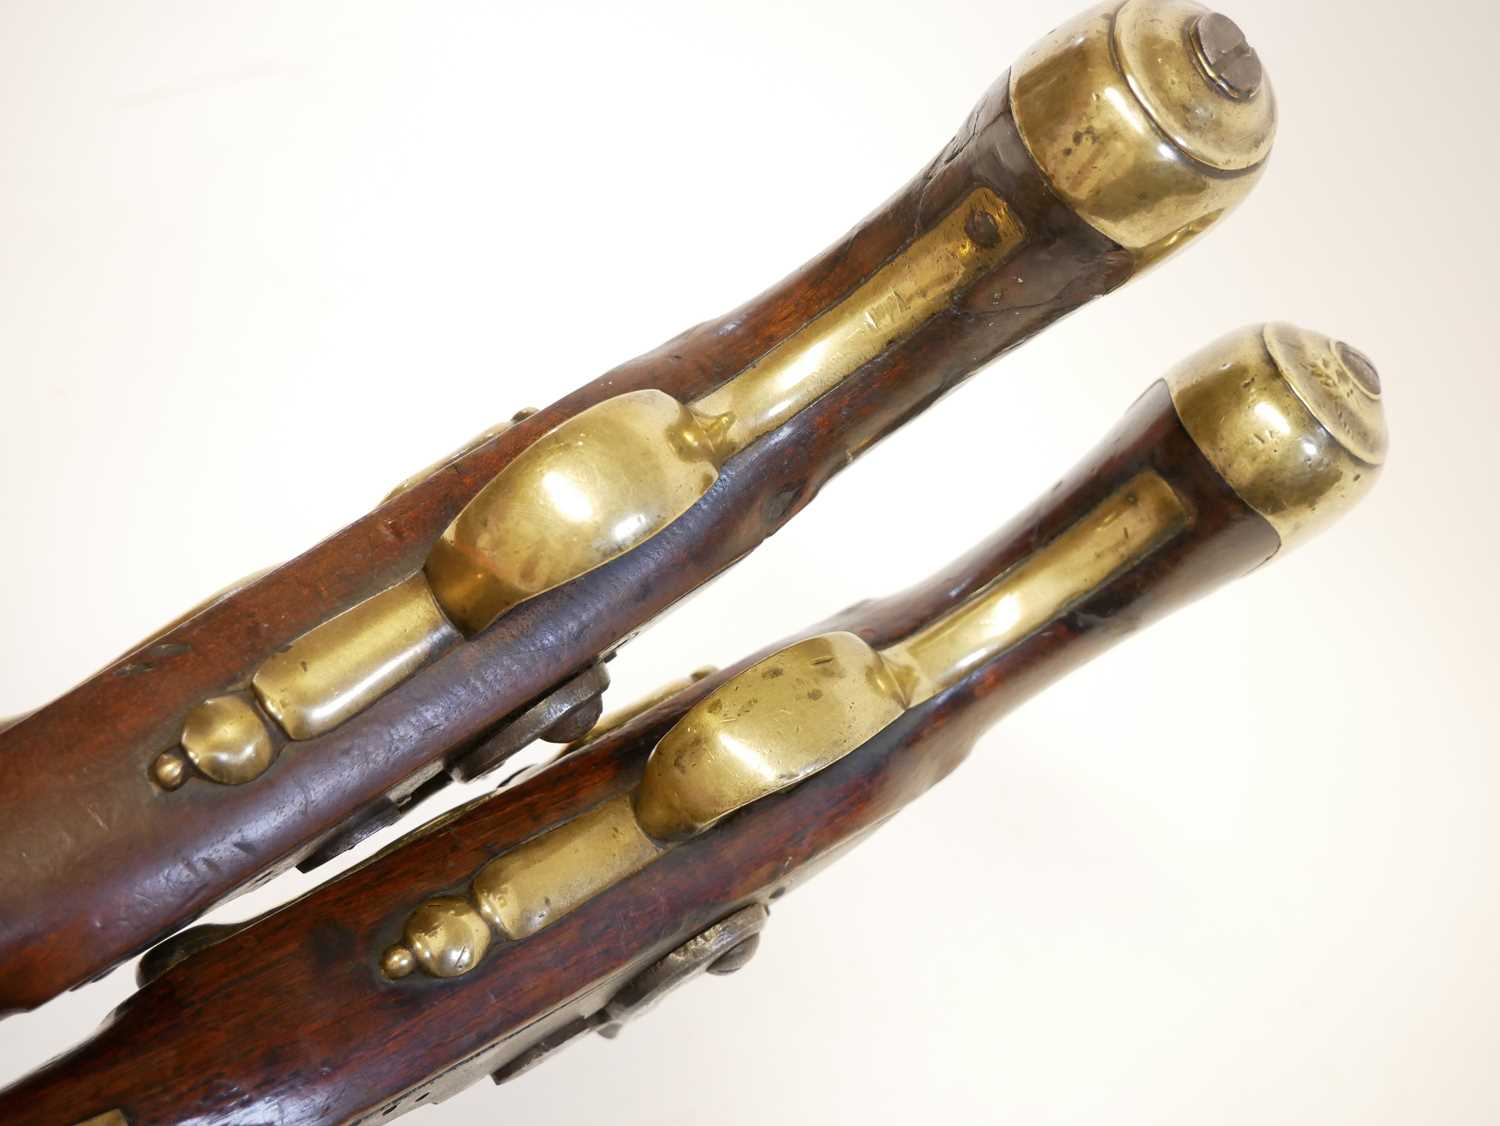 Matched together pair of percussion pistols - Image 6 of 11